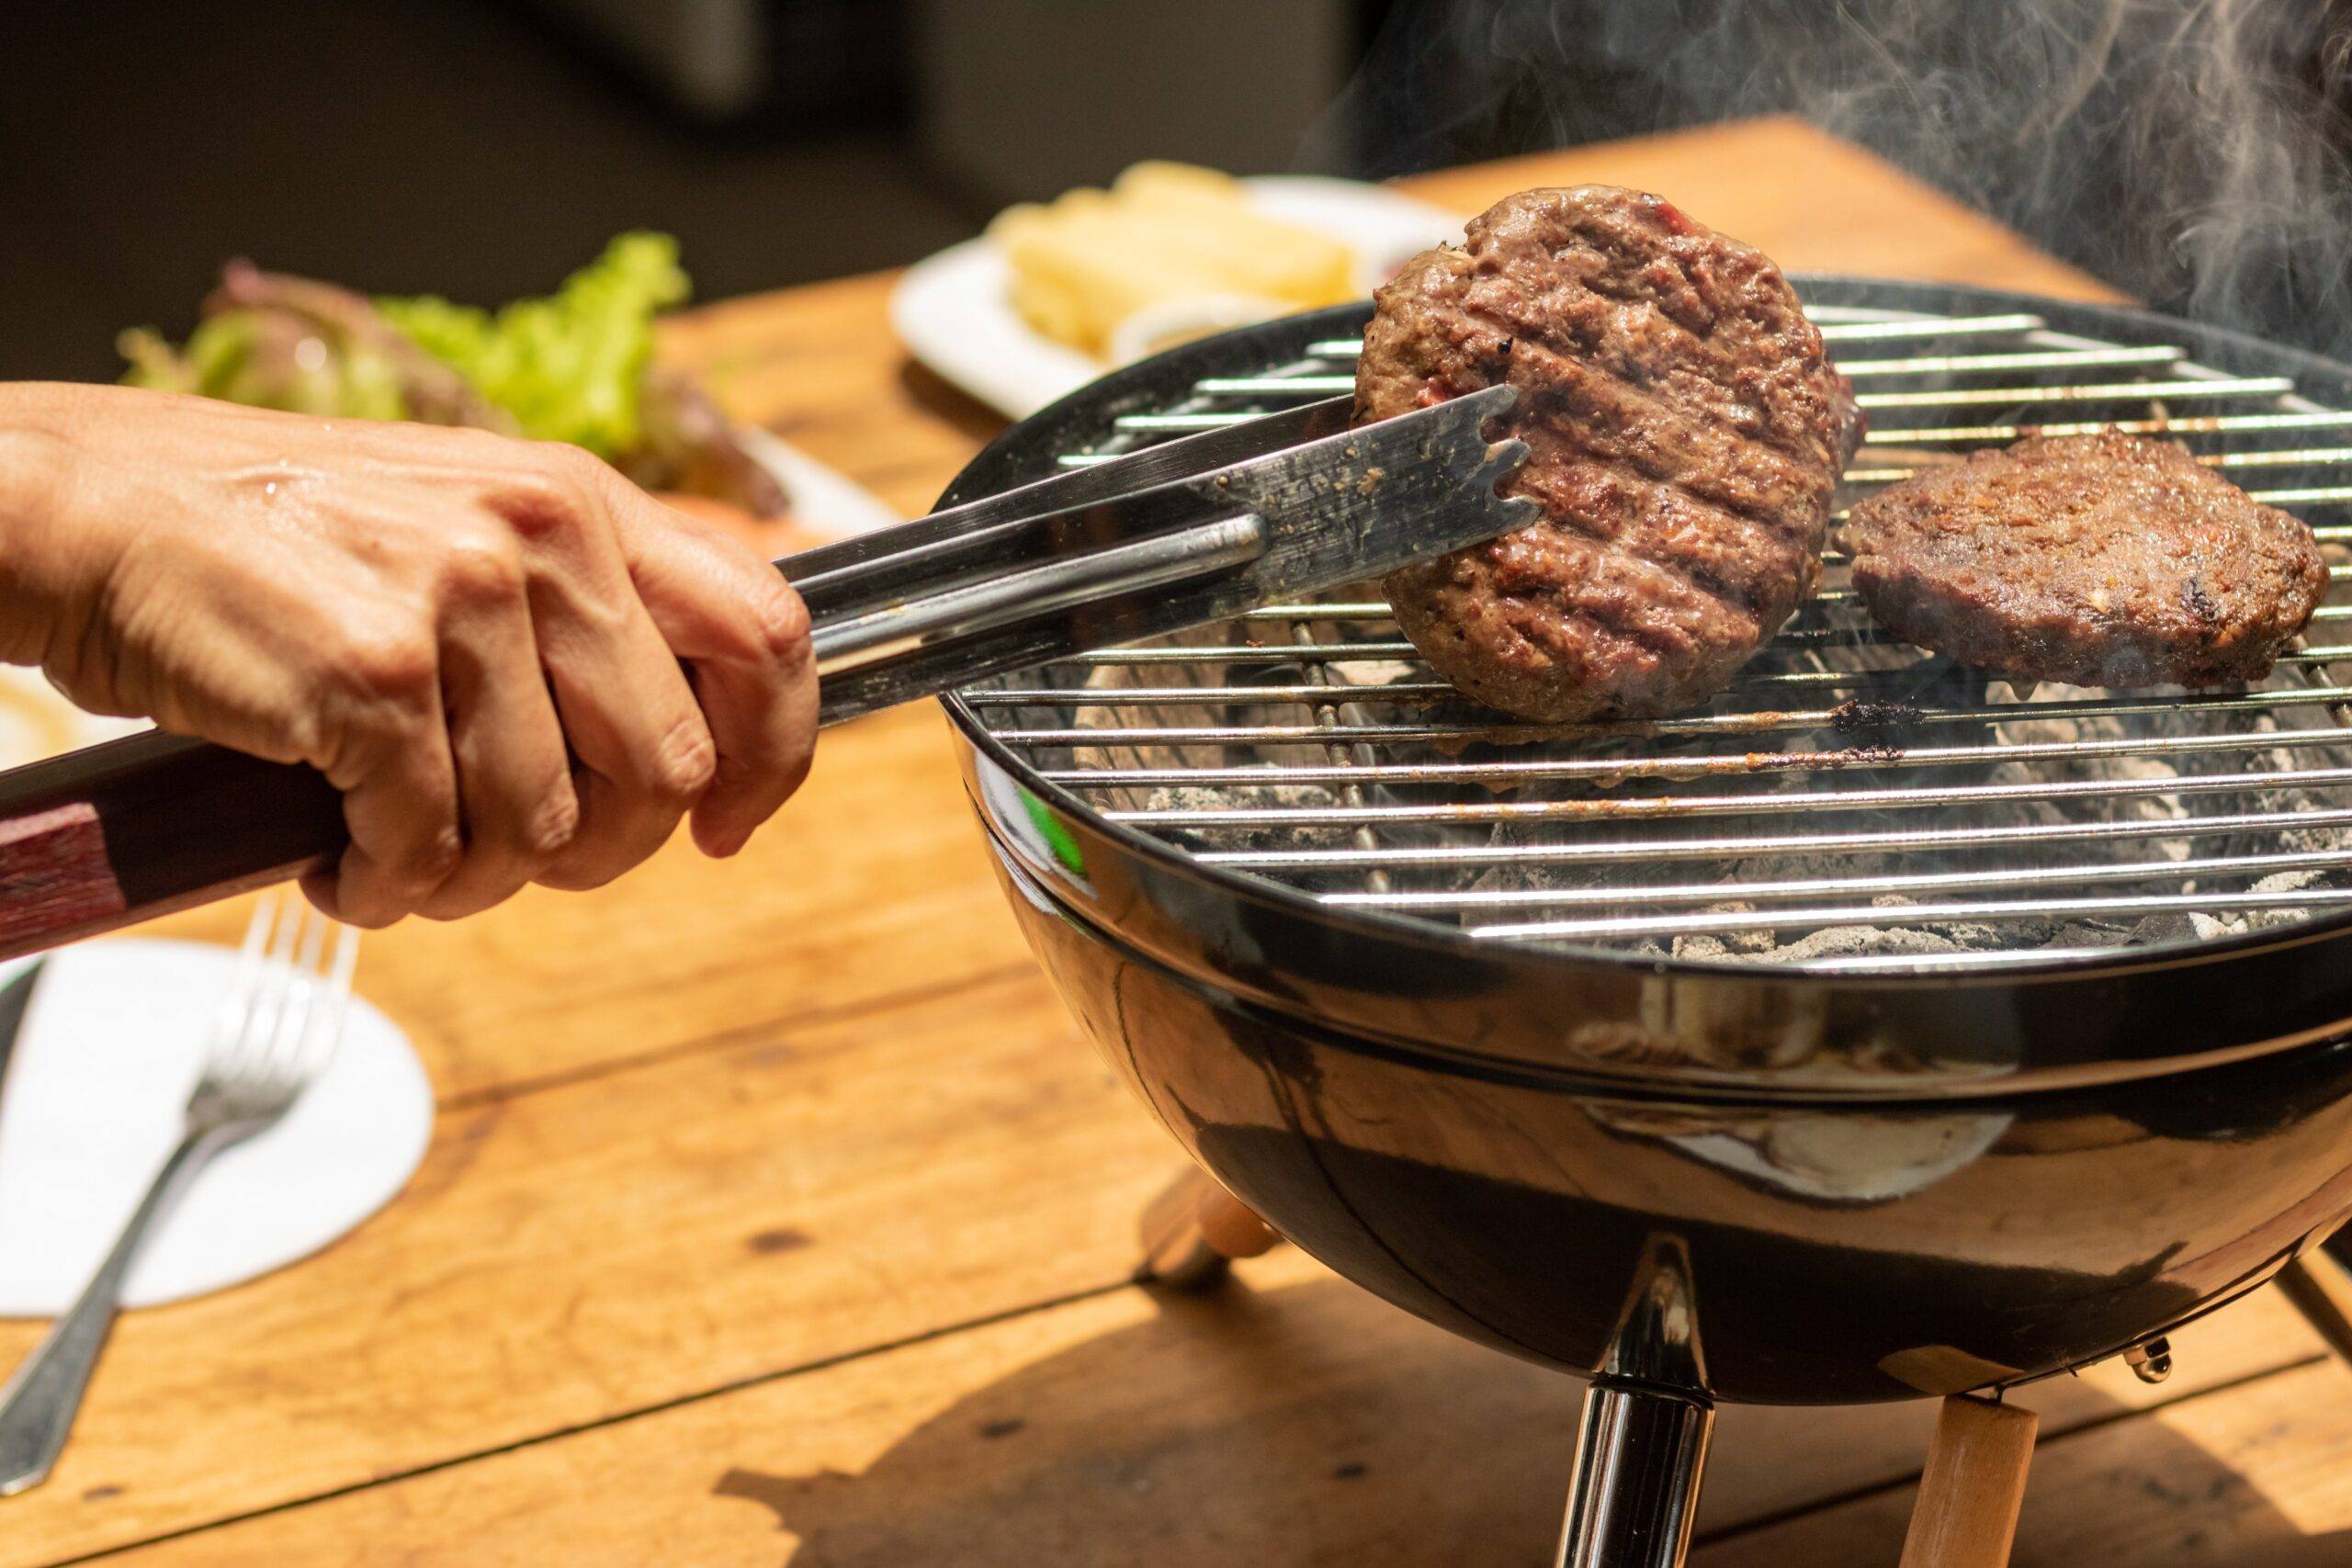 How To: Beginner’s Guide To Grilling Burgers